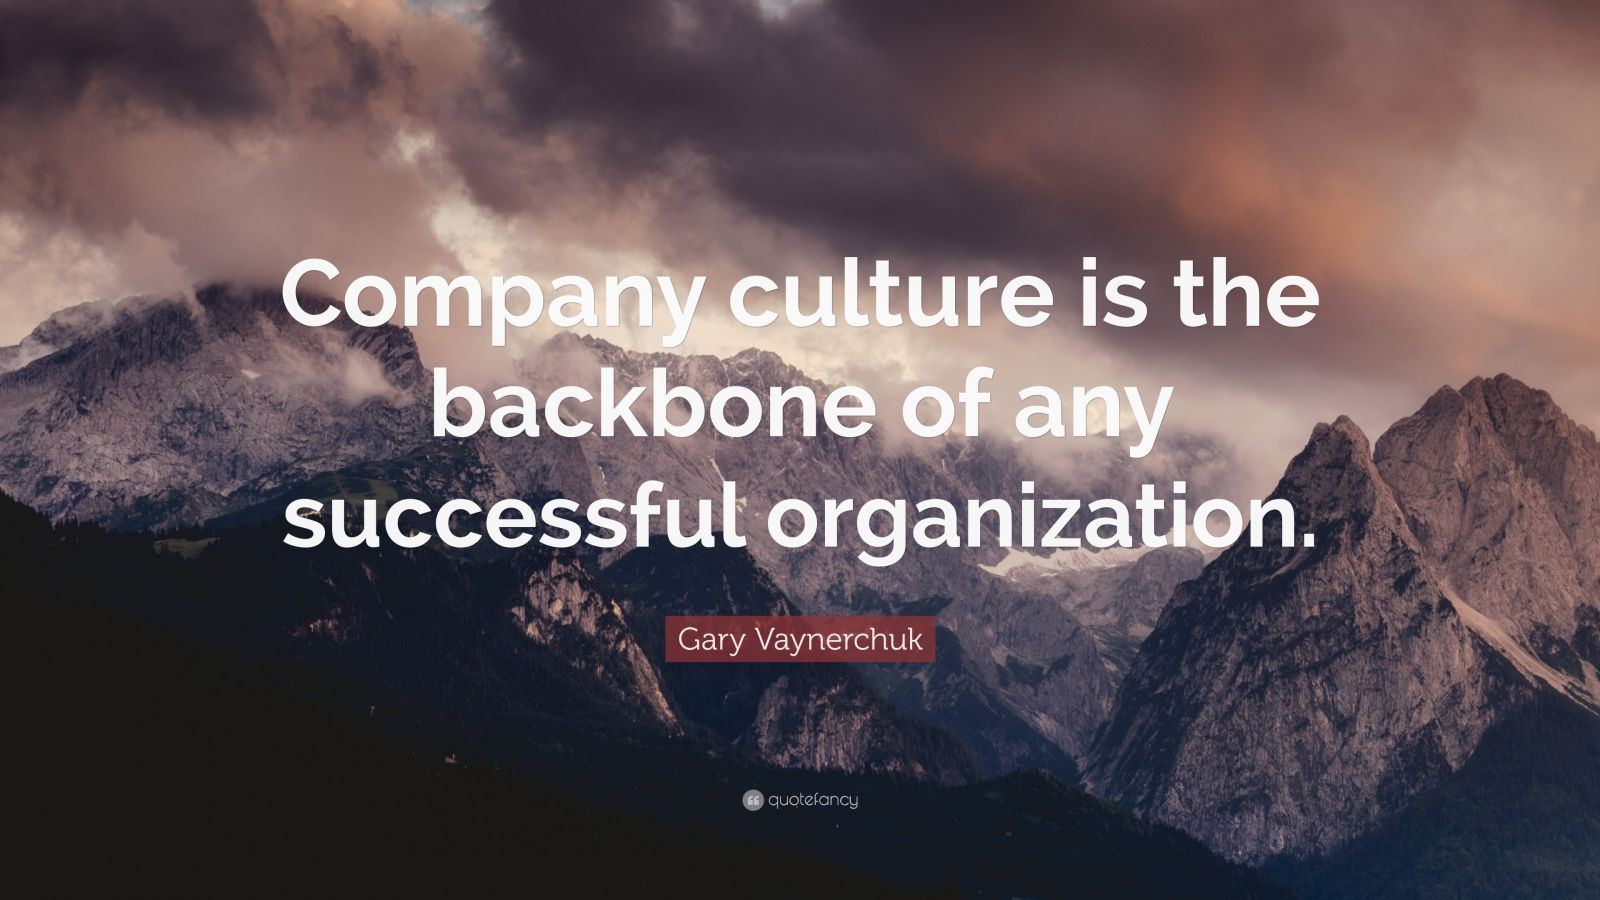 Company drucker peter cultures country try quotes never change quote instead got ve work